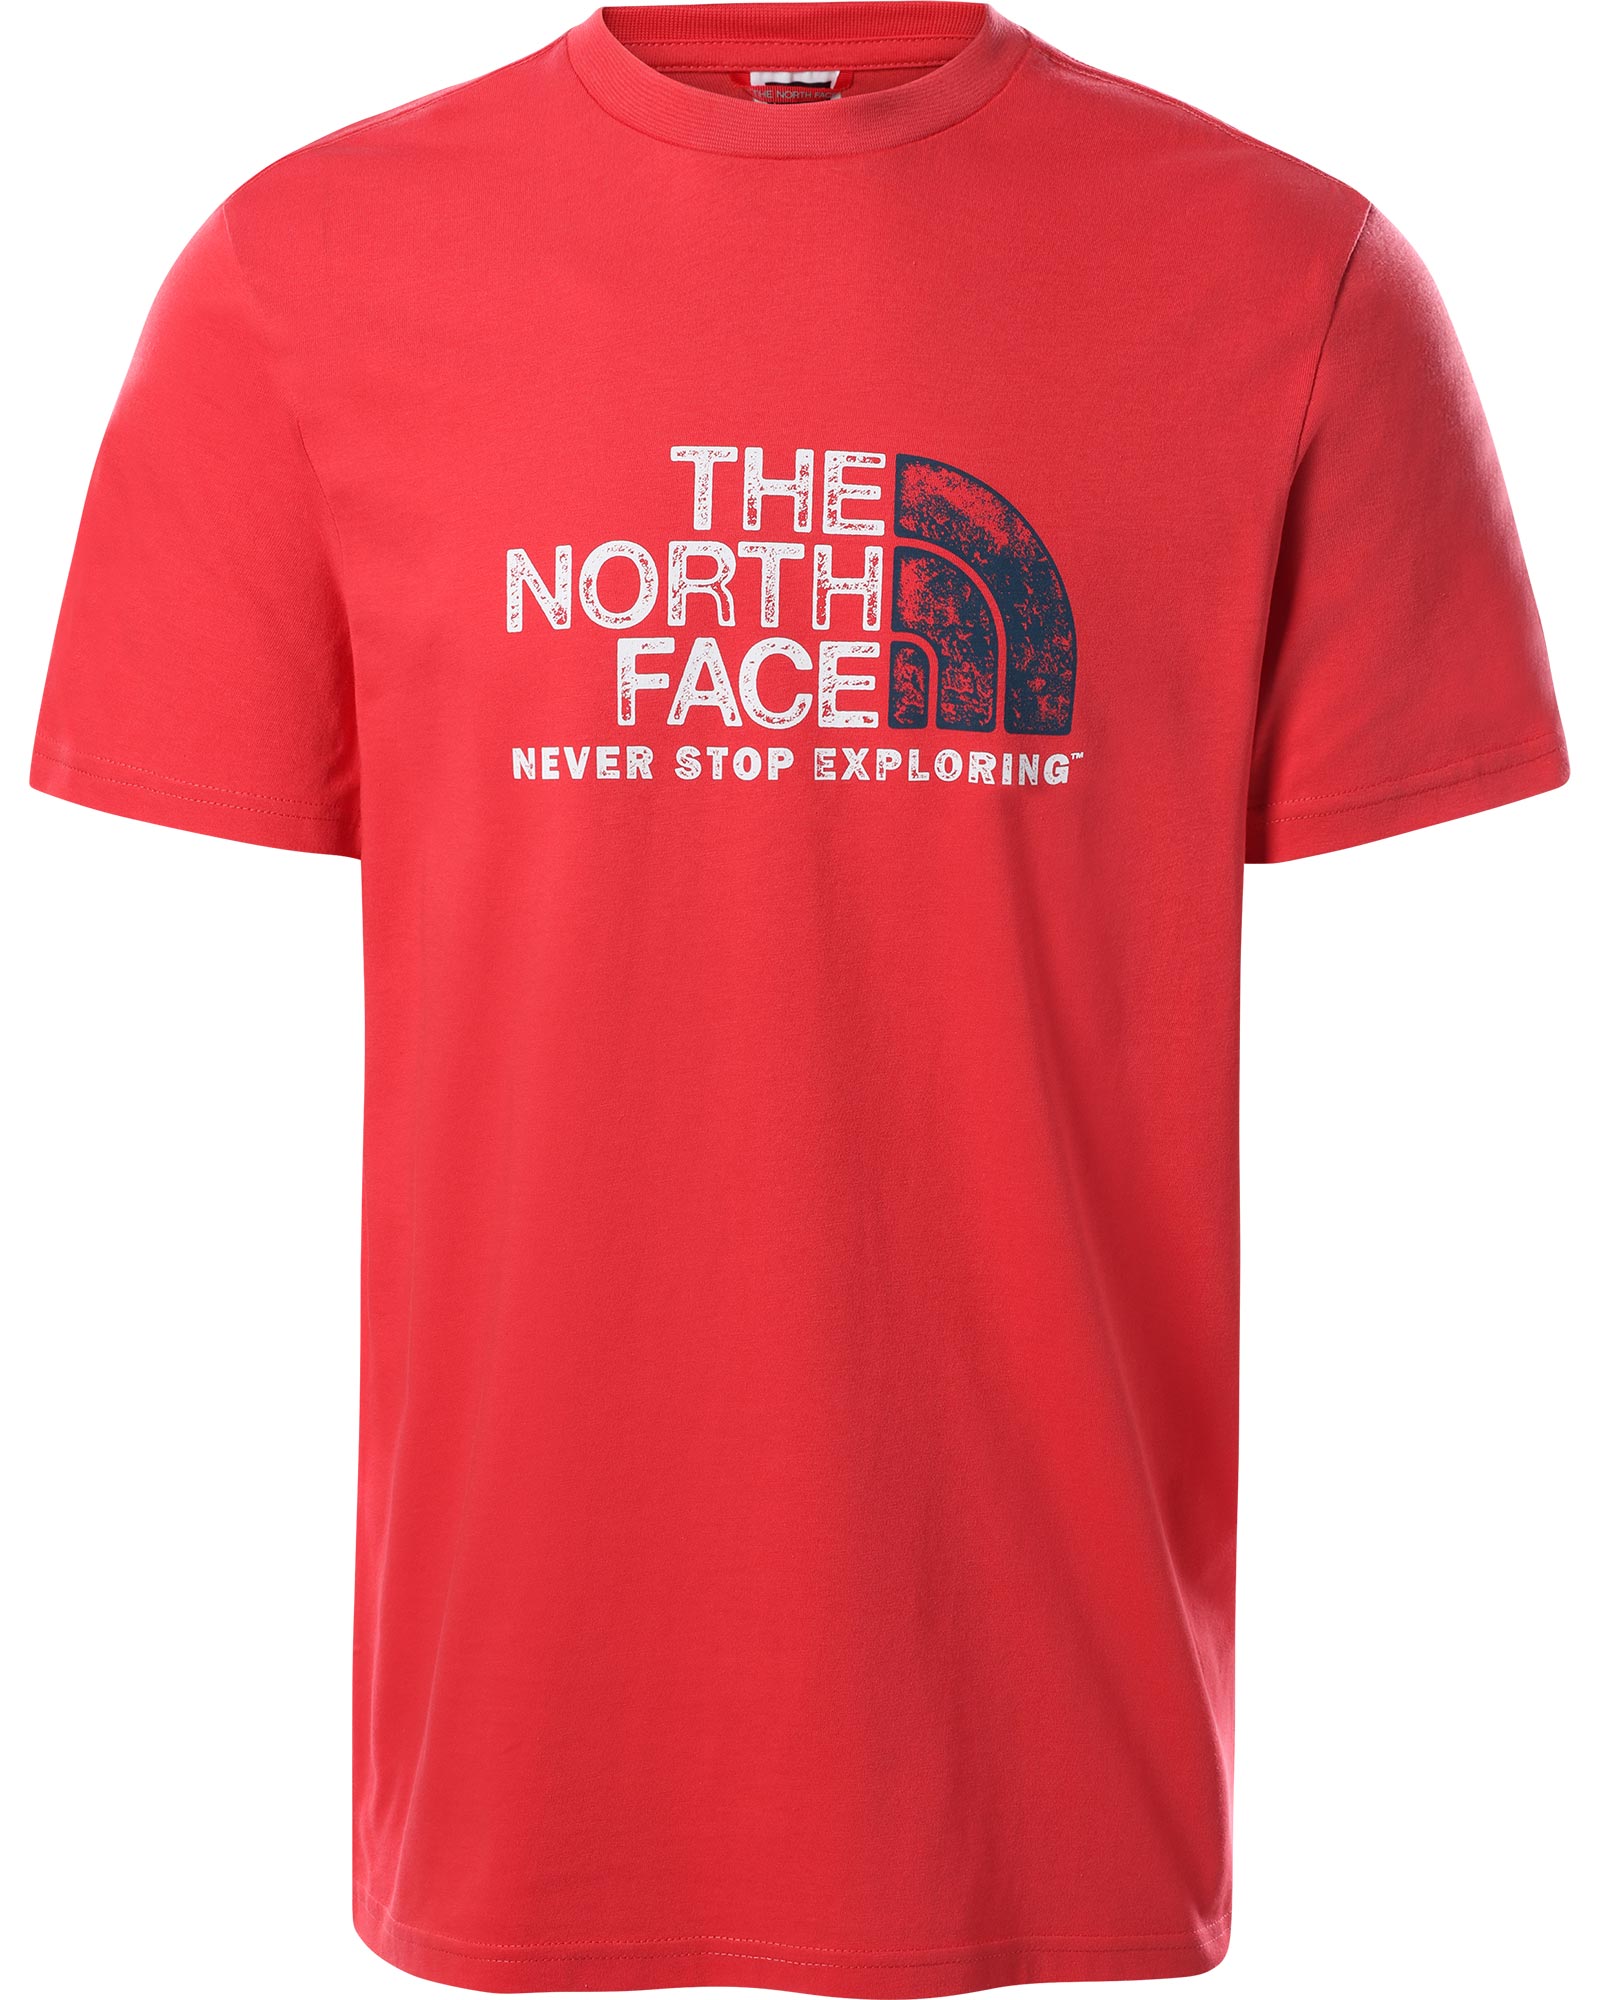 The North Face Rust Men’s T Shirt - Rococco Red S